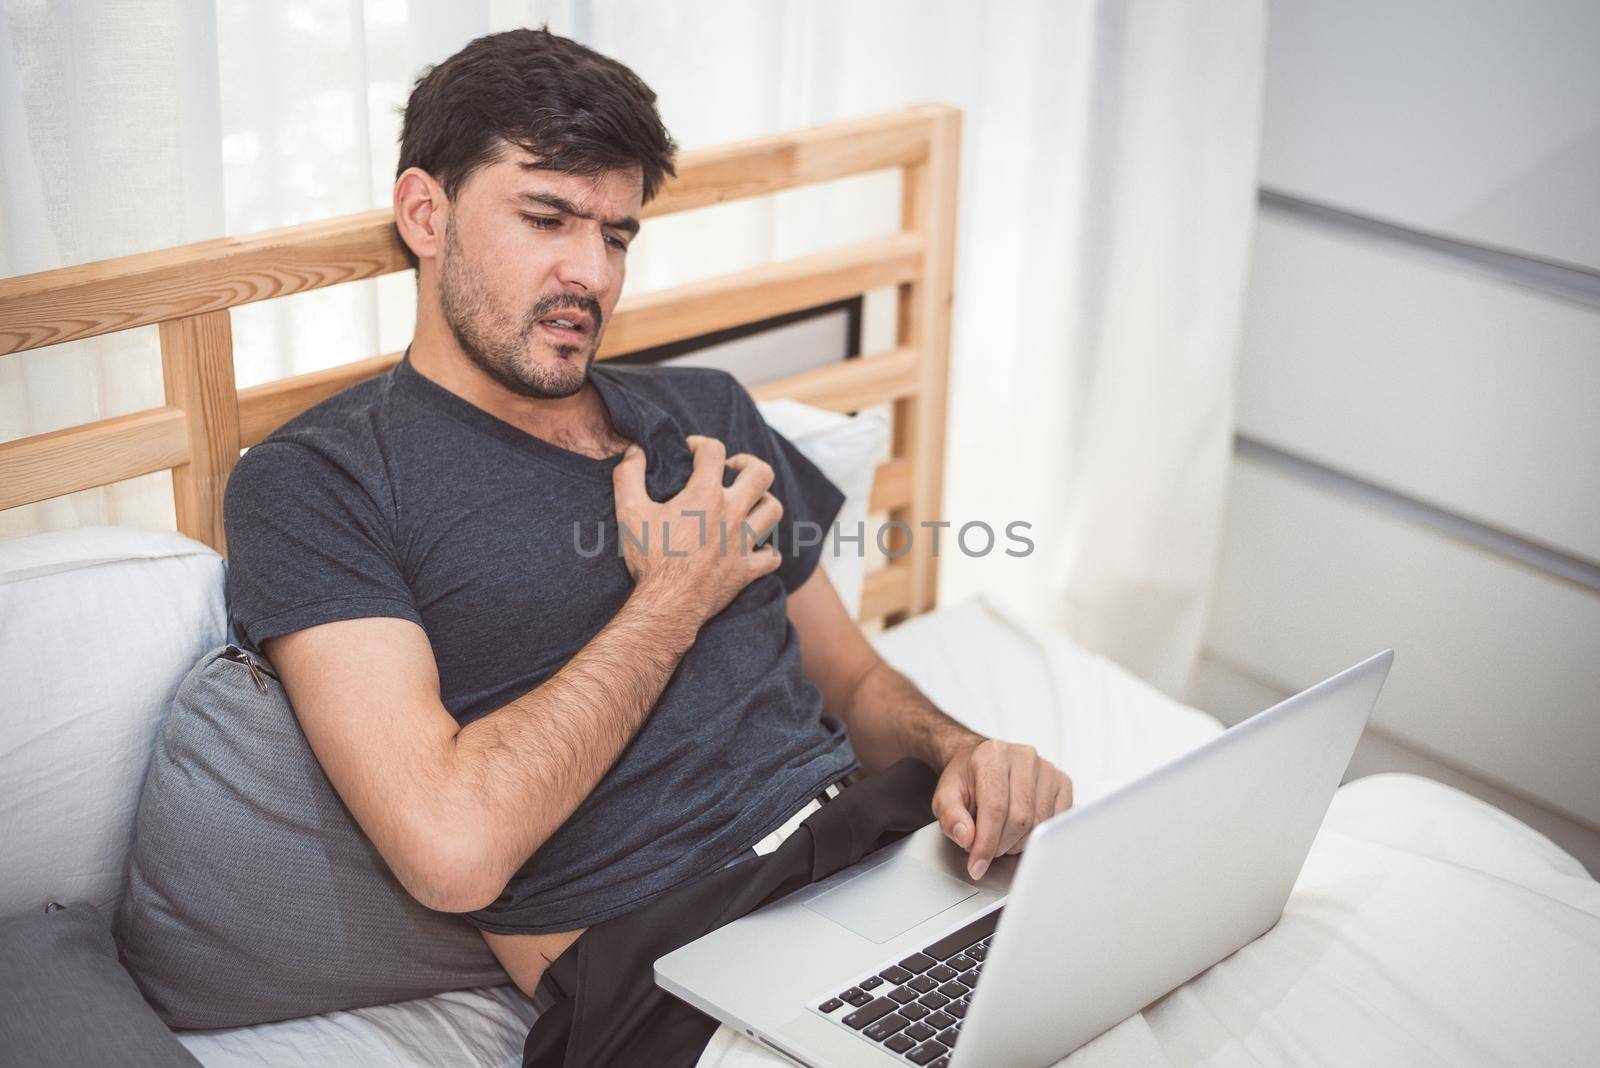 Businessman using laptop computer overnight cause heart attack failure symptom. Healthcare and medical wellness of overworked people lifestyle concept. Technology and workaholic illness theme. by MiniStocker